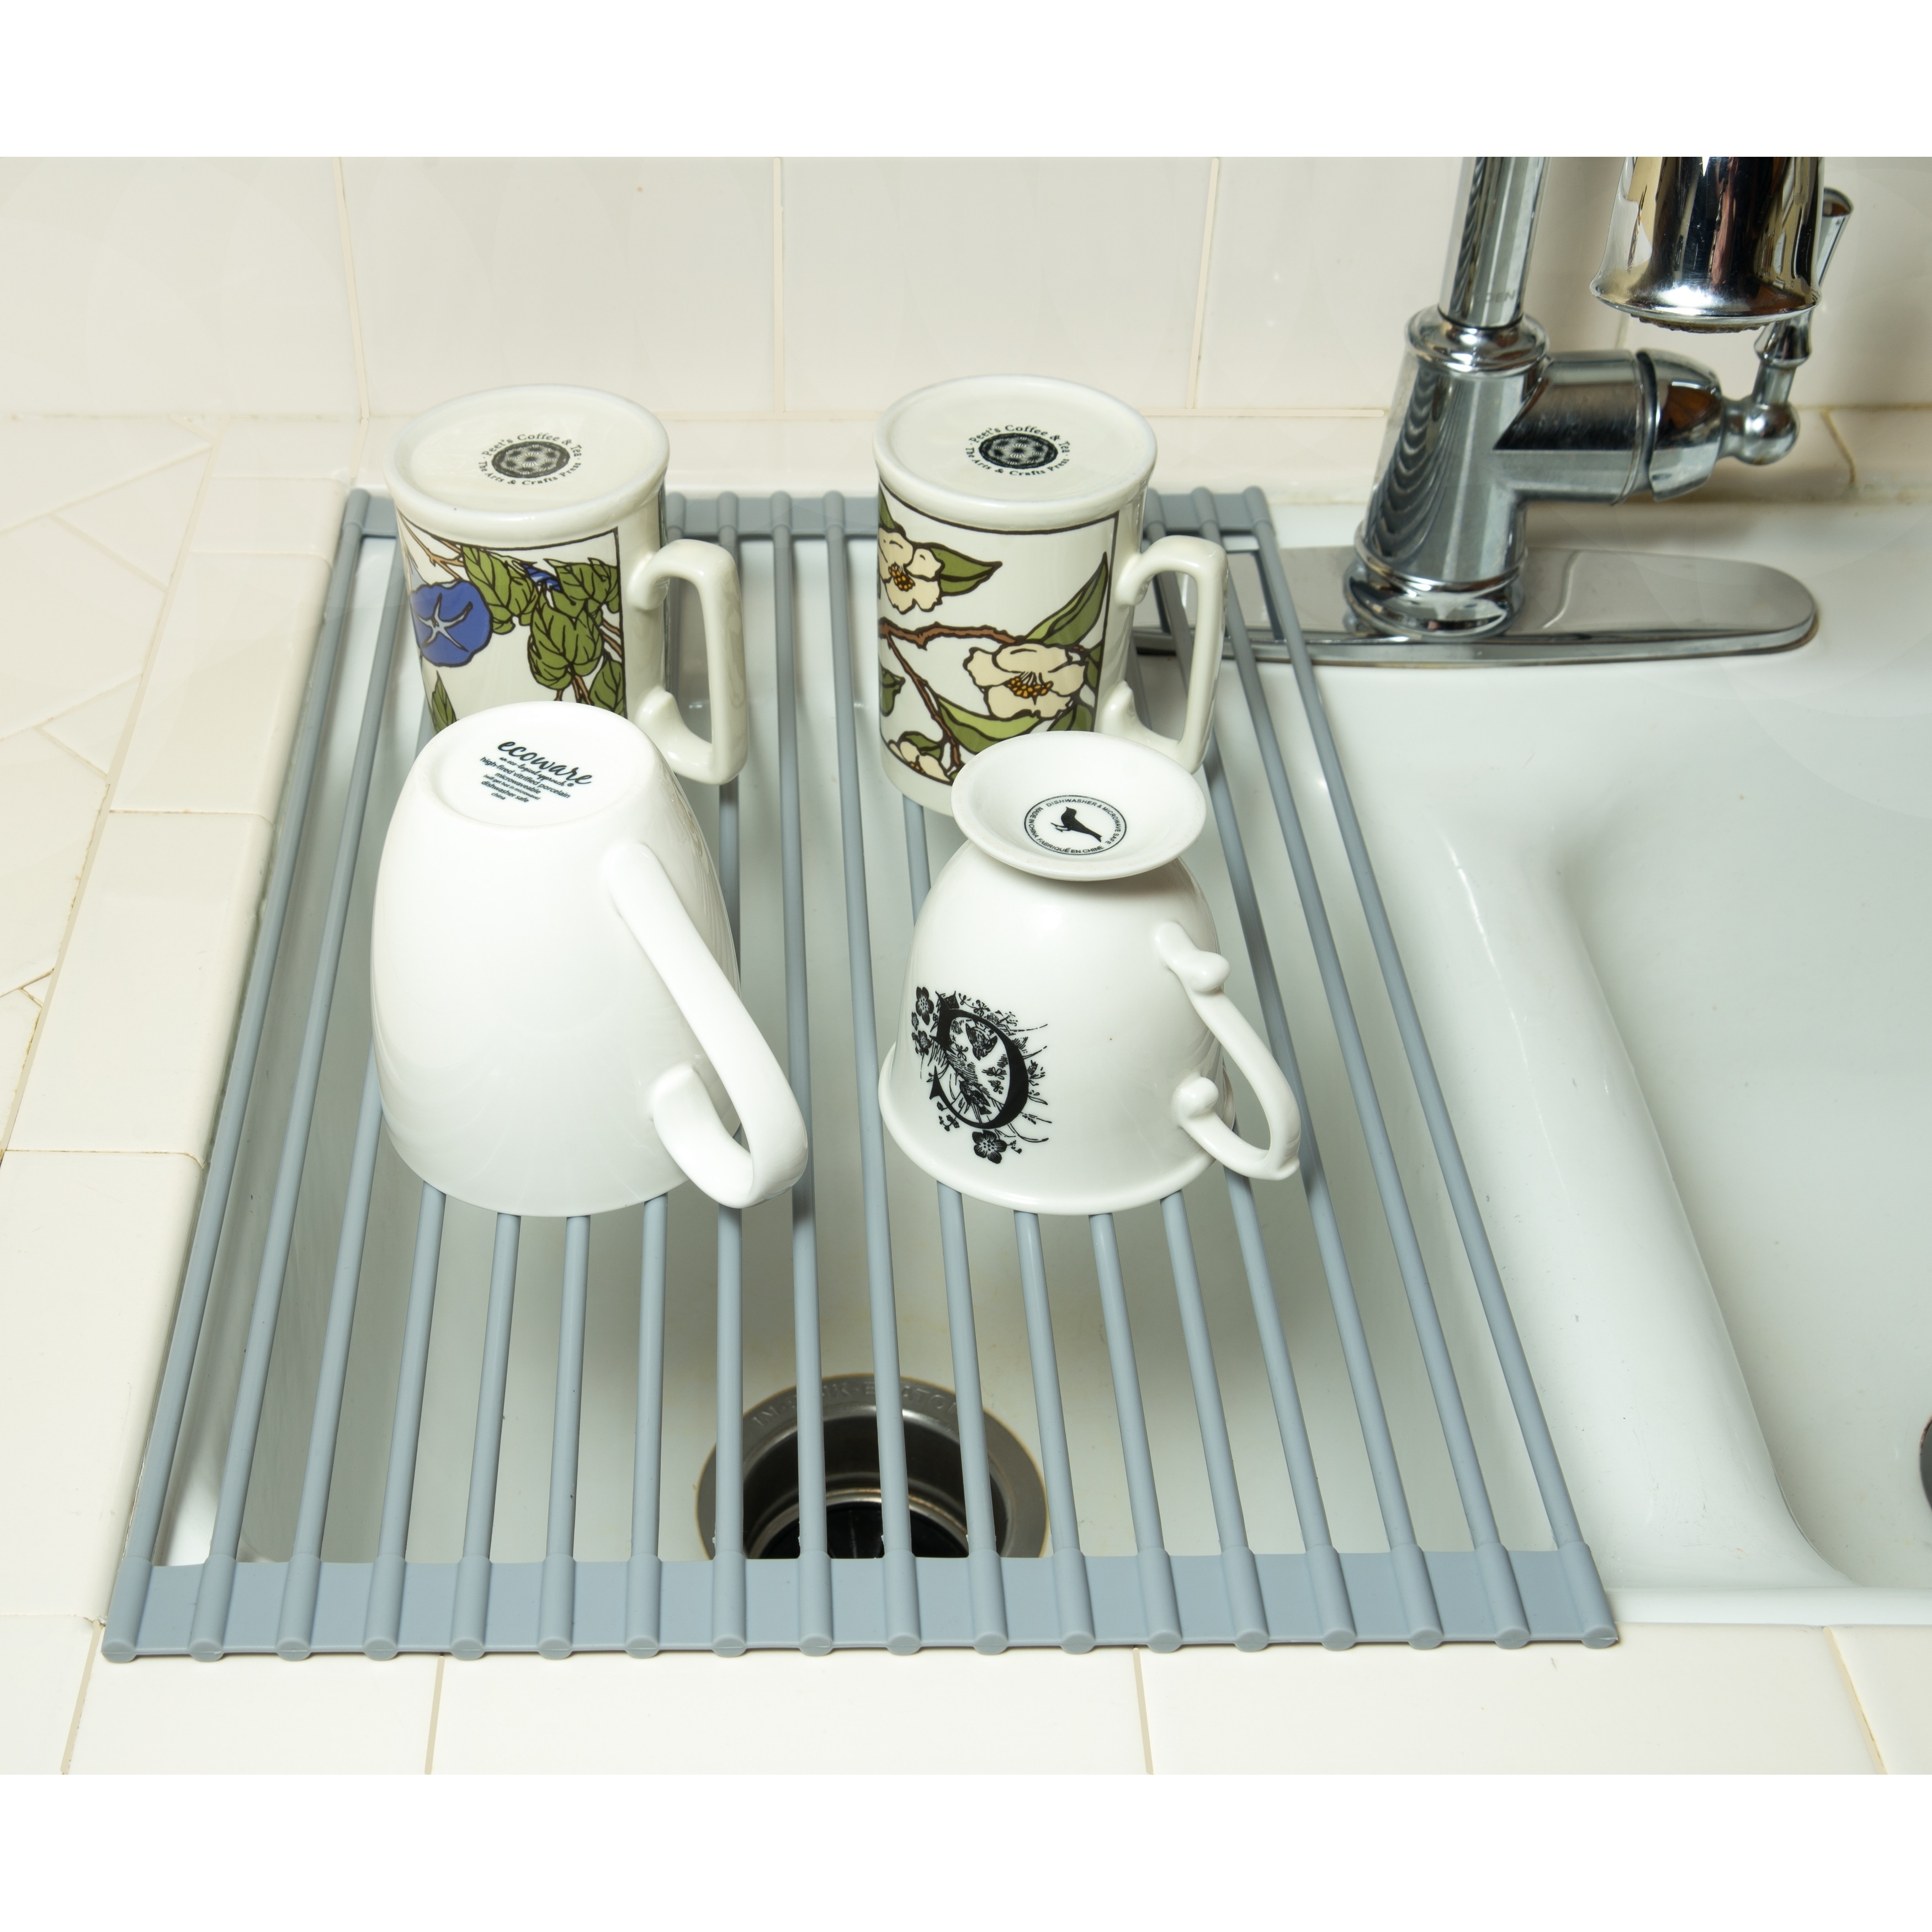 Roll-Up Over-The-Sink Dish Rack